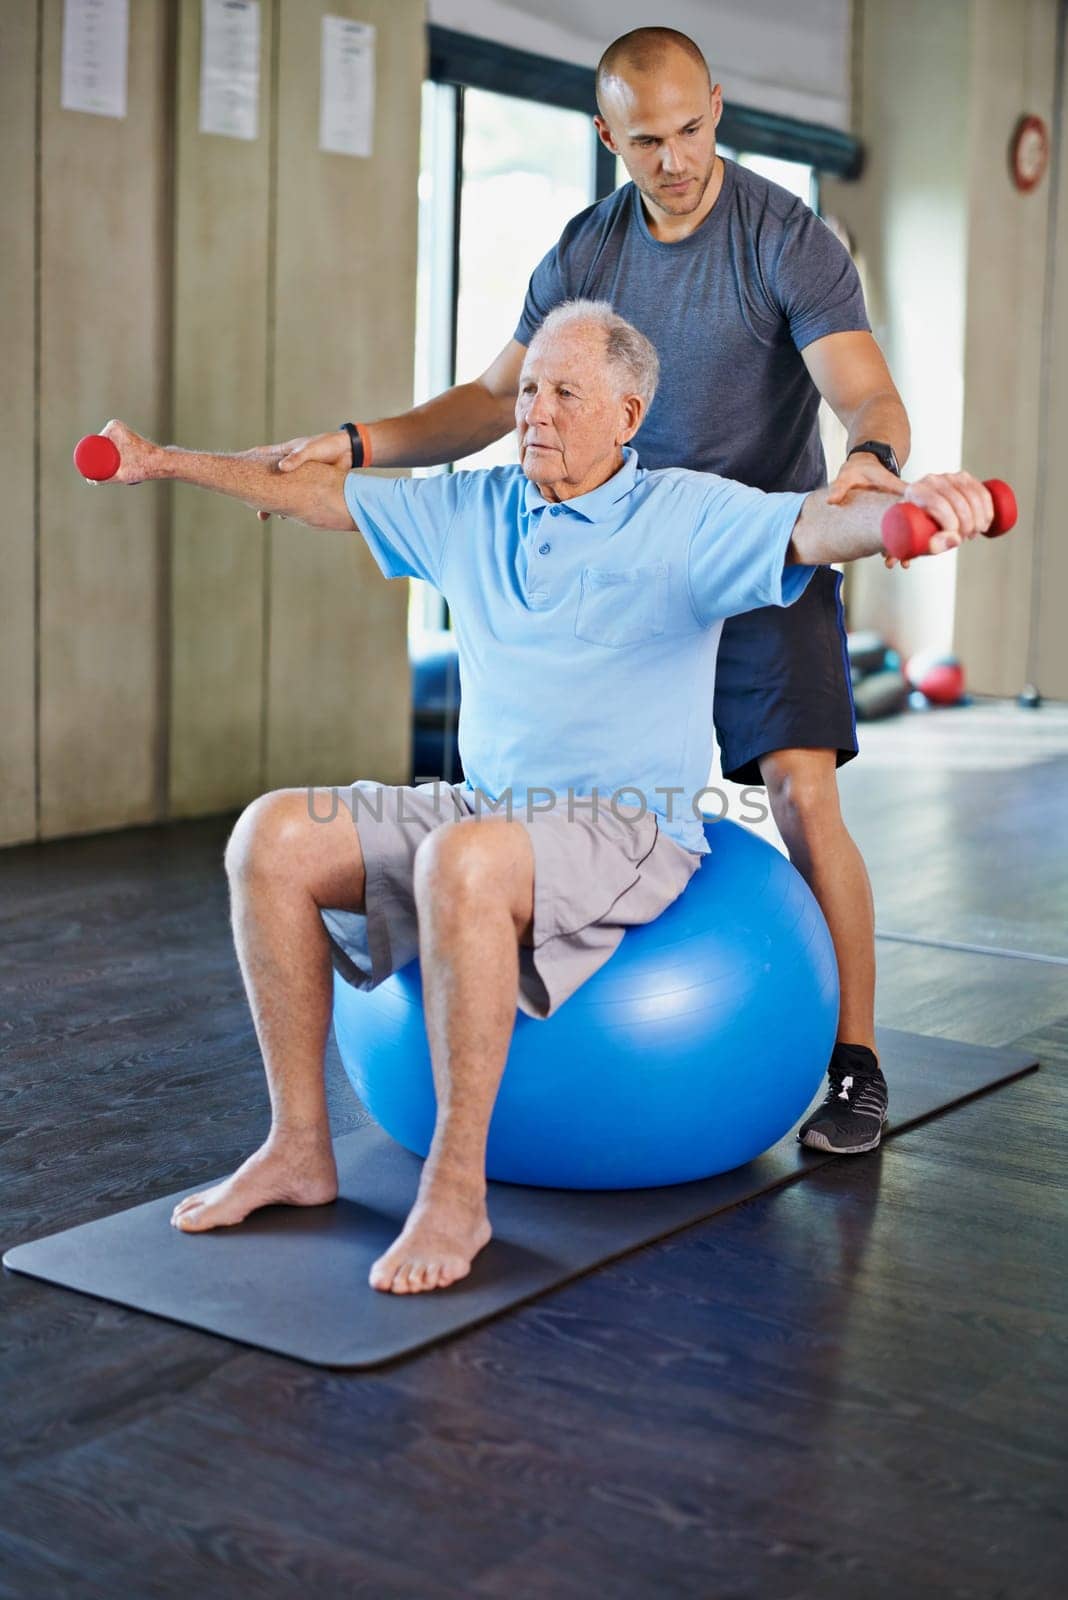 Physiotherapist, helping and senior man with weights, training and elderly support for care. Men, gym and exercise for health, wellness and coaching with yoga ball for mature rehab and wellbeing.